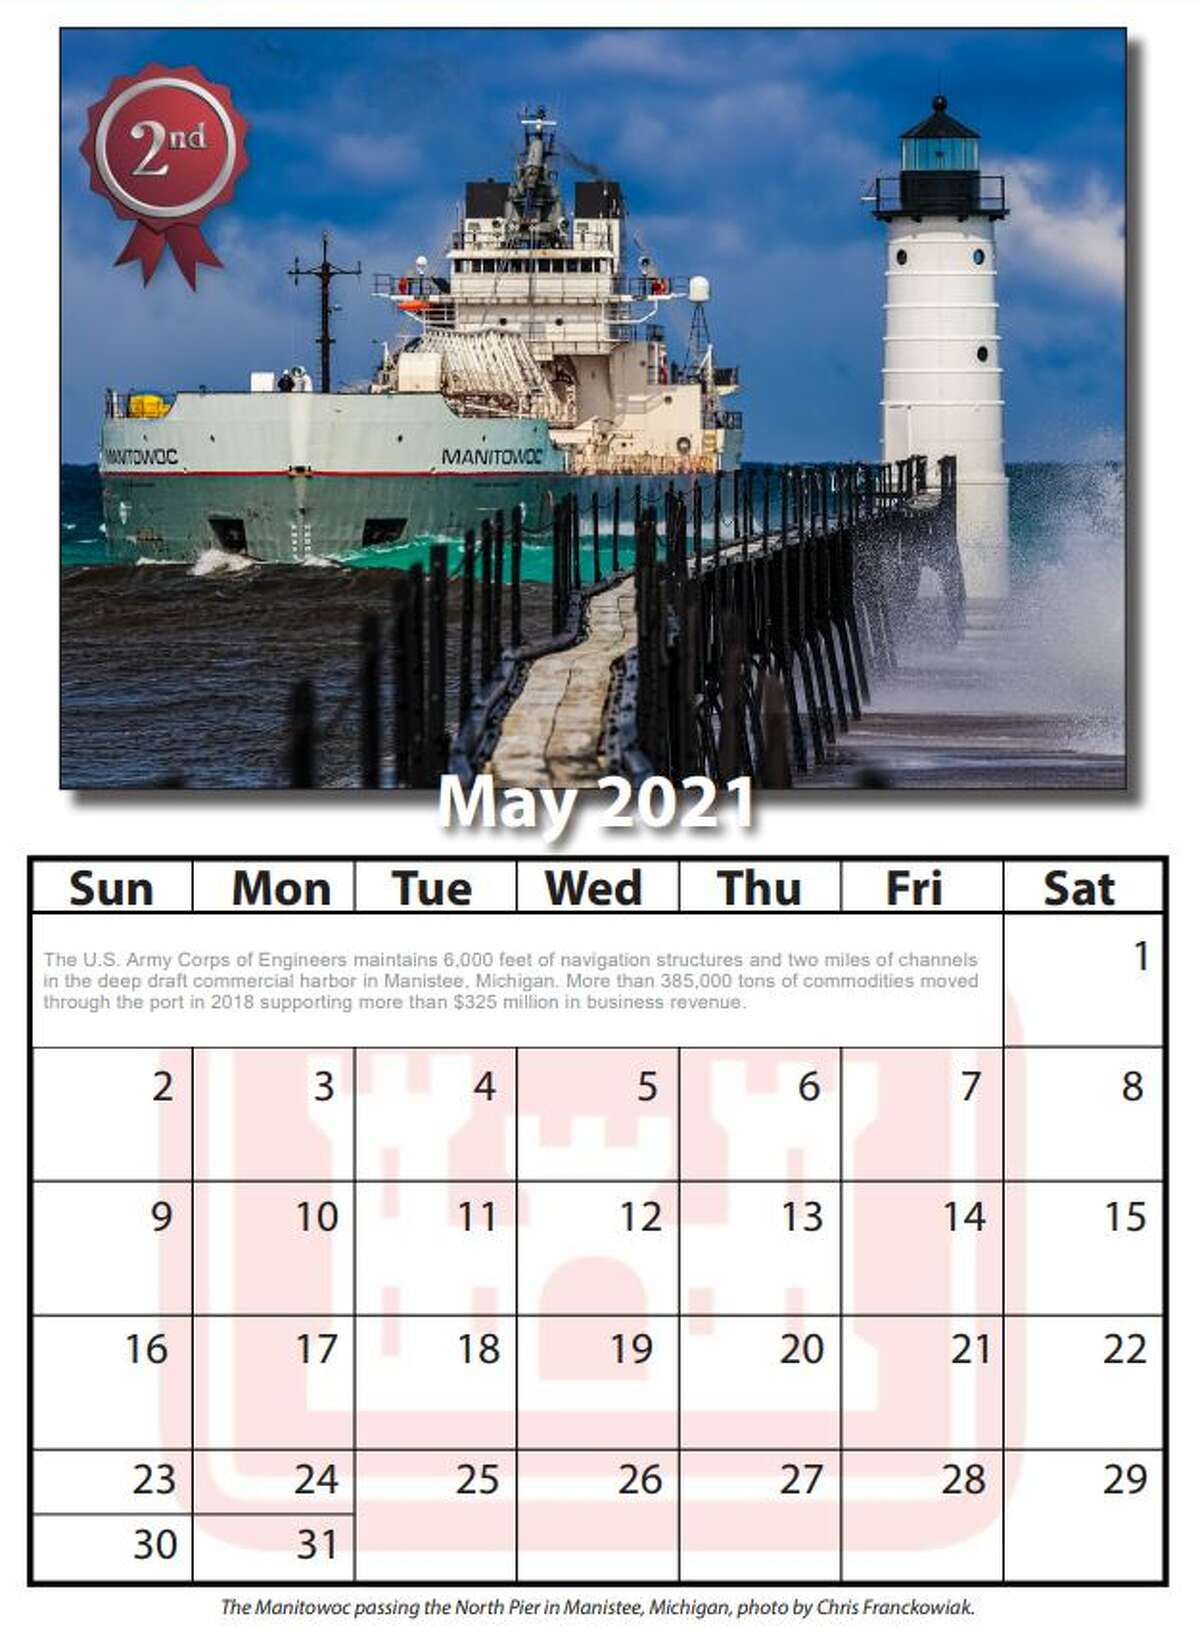 Manistee headlines calendar for second year in a row